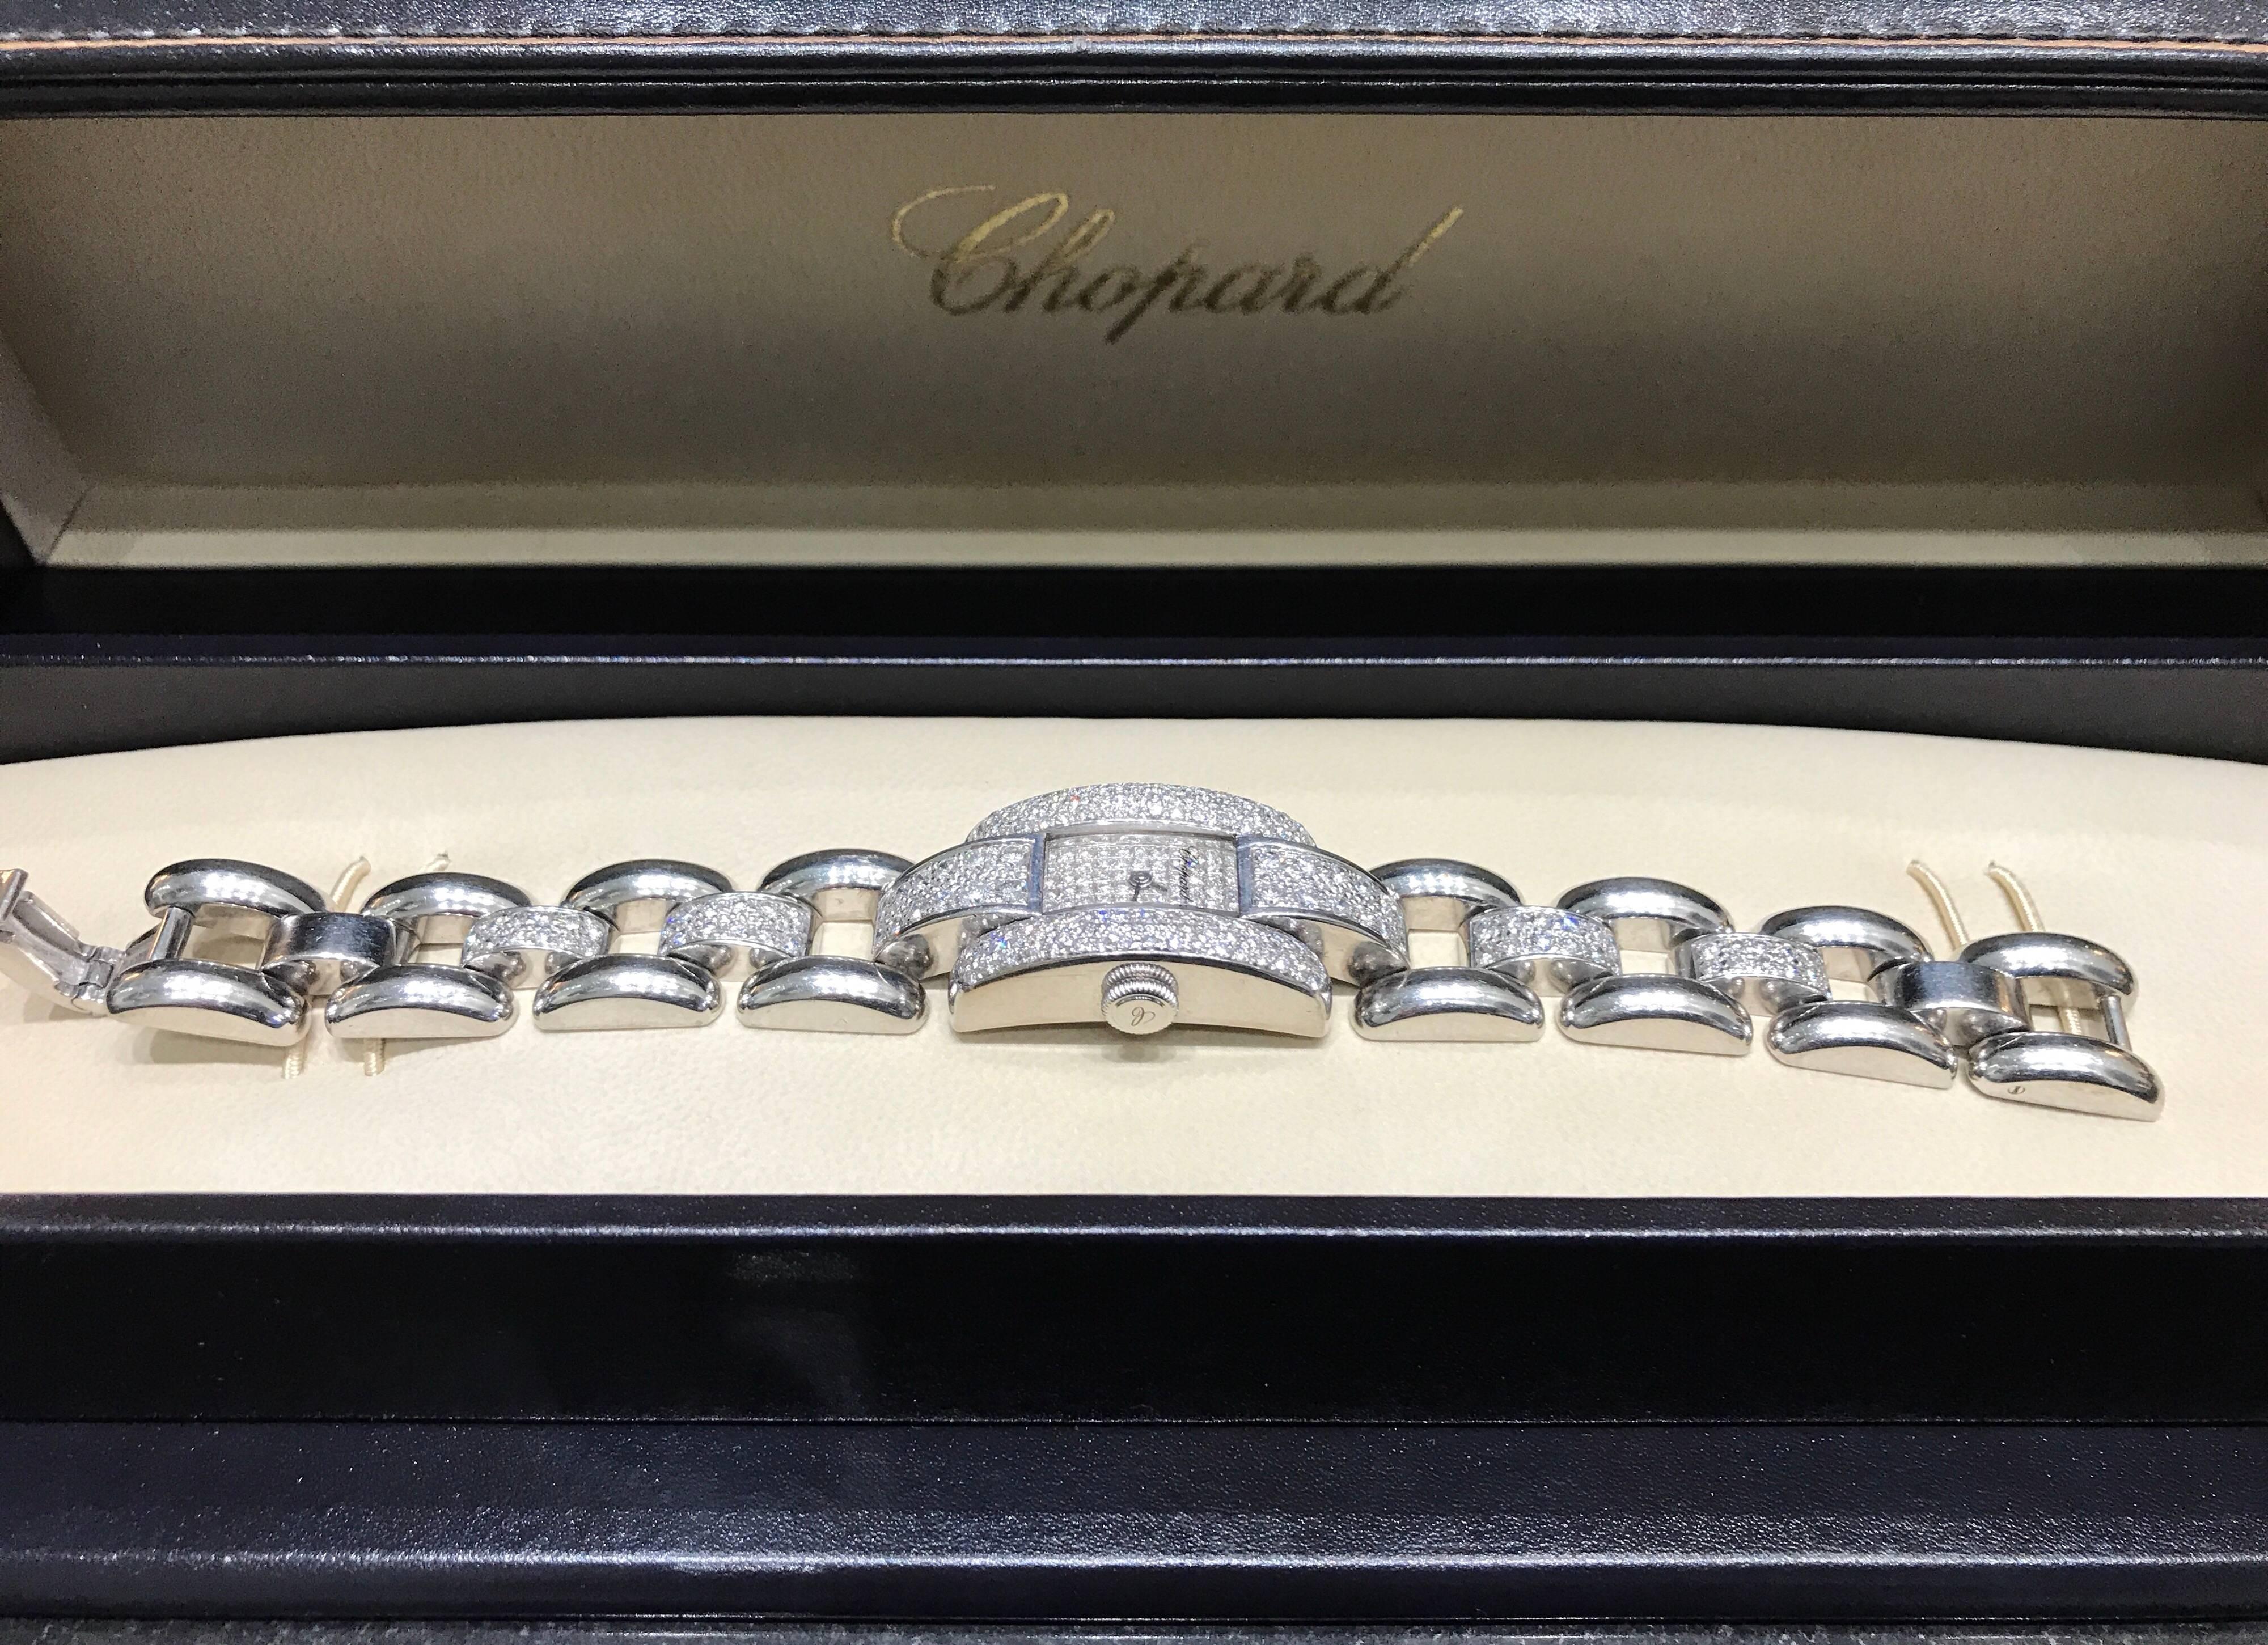 A Chopard lady's diamond La Strada Bracelet Watch set in 18k white gold. The watch features 283 brilliant-cut diamonds of approx 5.5 carats after-set to a white gold band.
The watch is sold in the Chopard watch case and service warranty card.
Retail